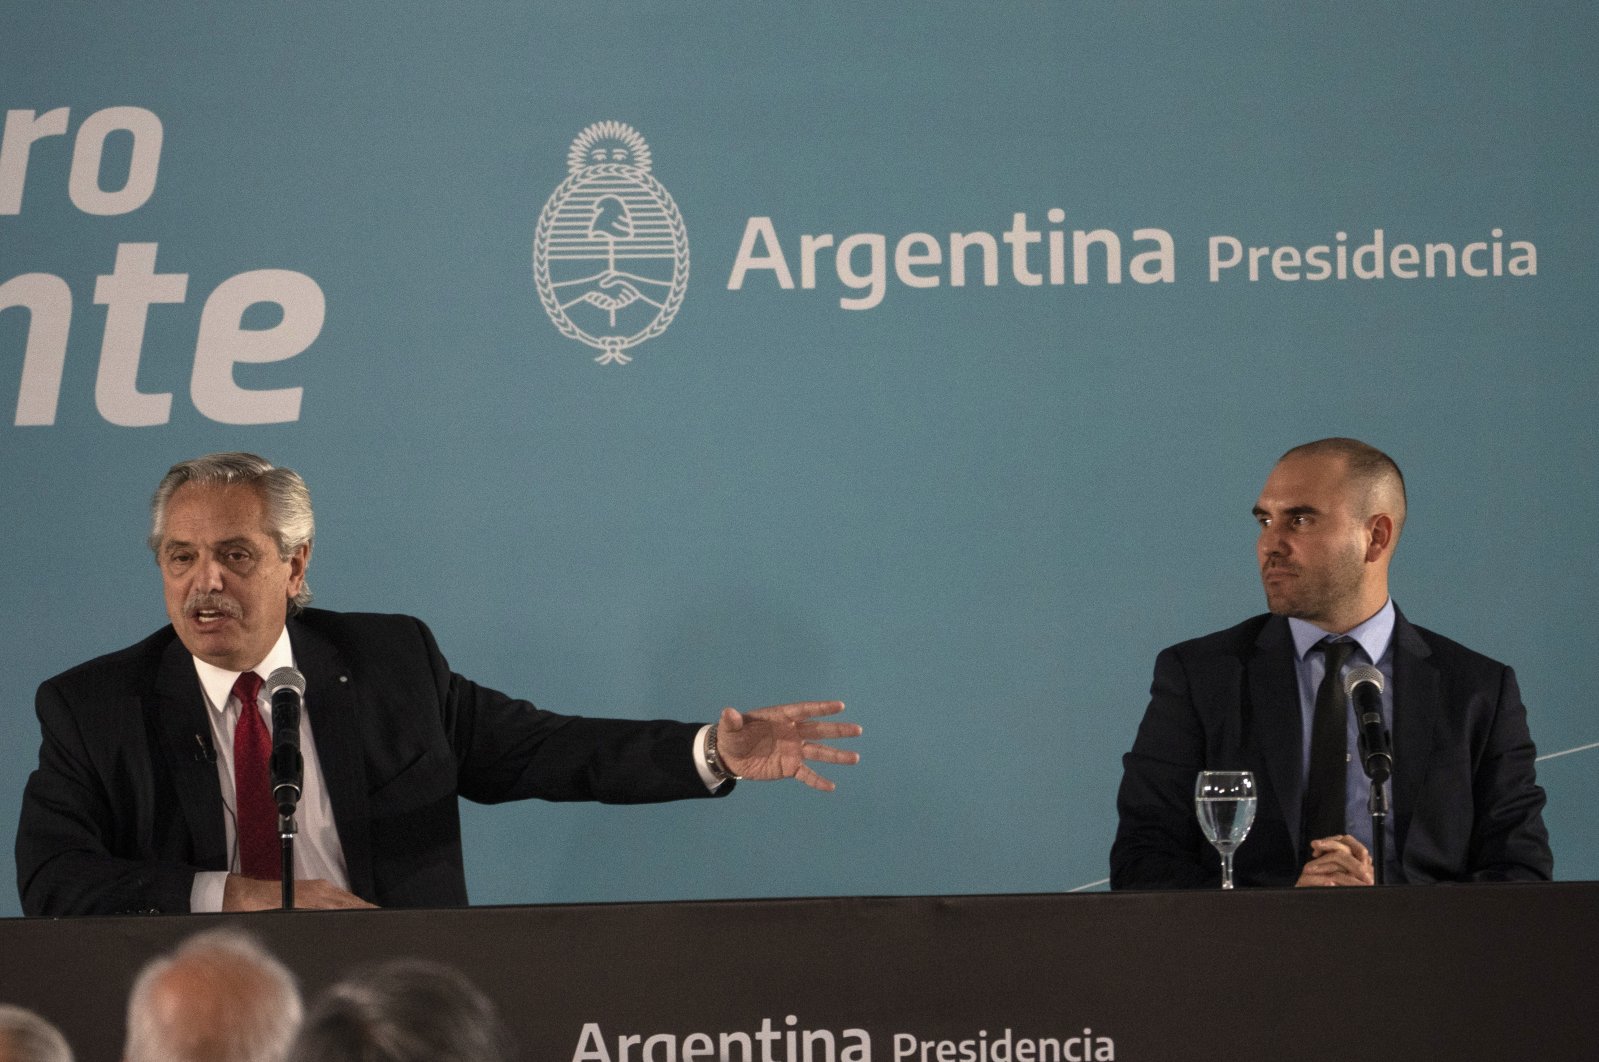 Argentinian President Alberto Fernandez (L) speaks next to then-Economy Minister Martin Guzman during an announcement in Buenos Aires, Argentina, June 6, 2022. (AP Photo)